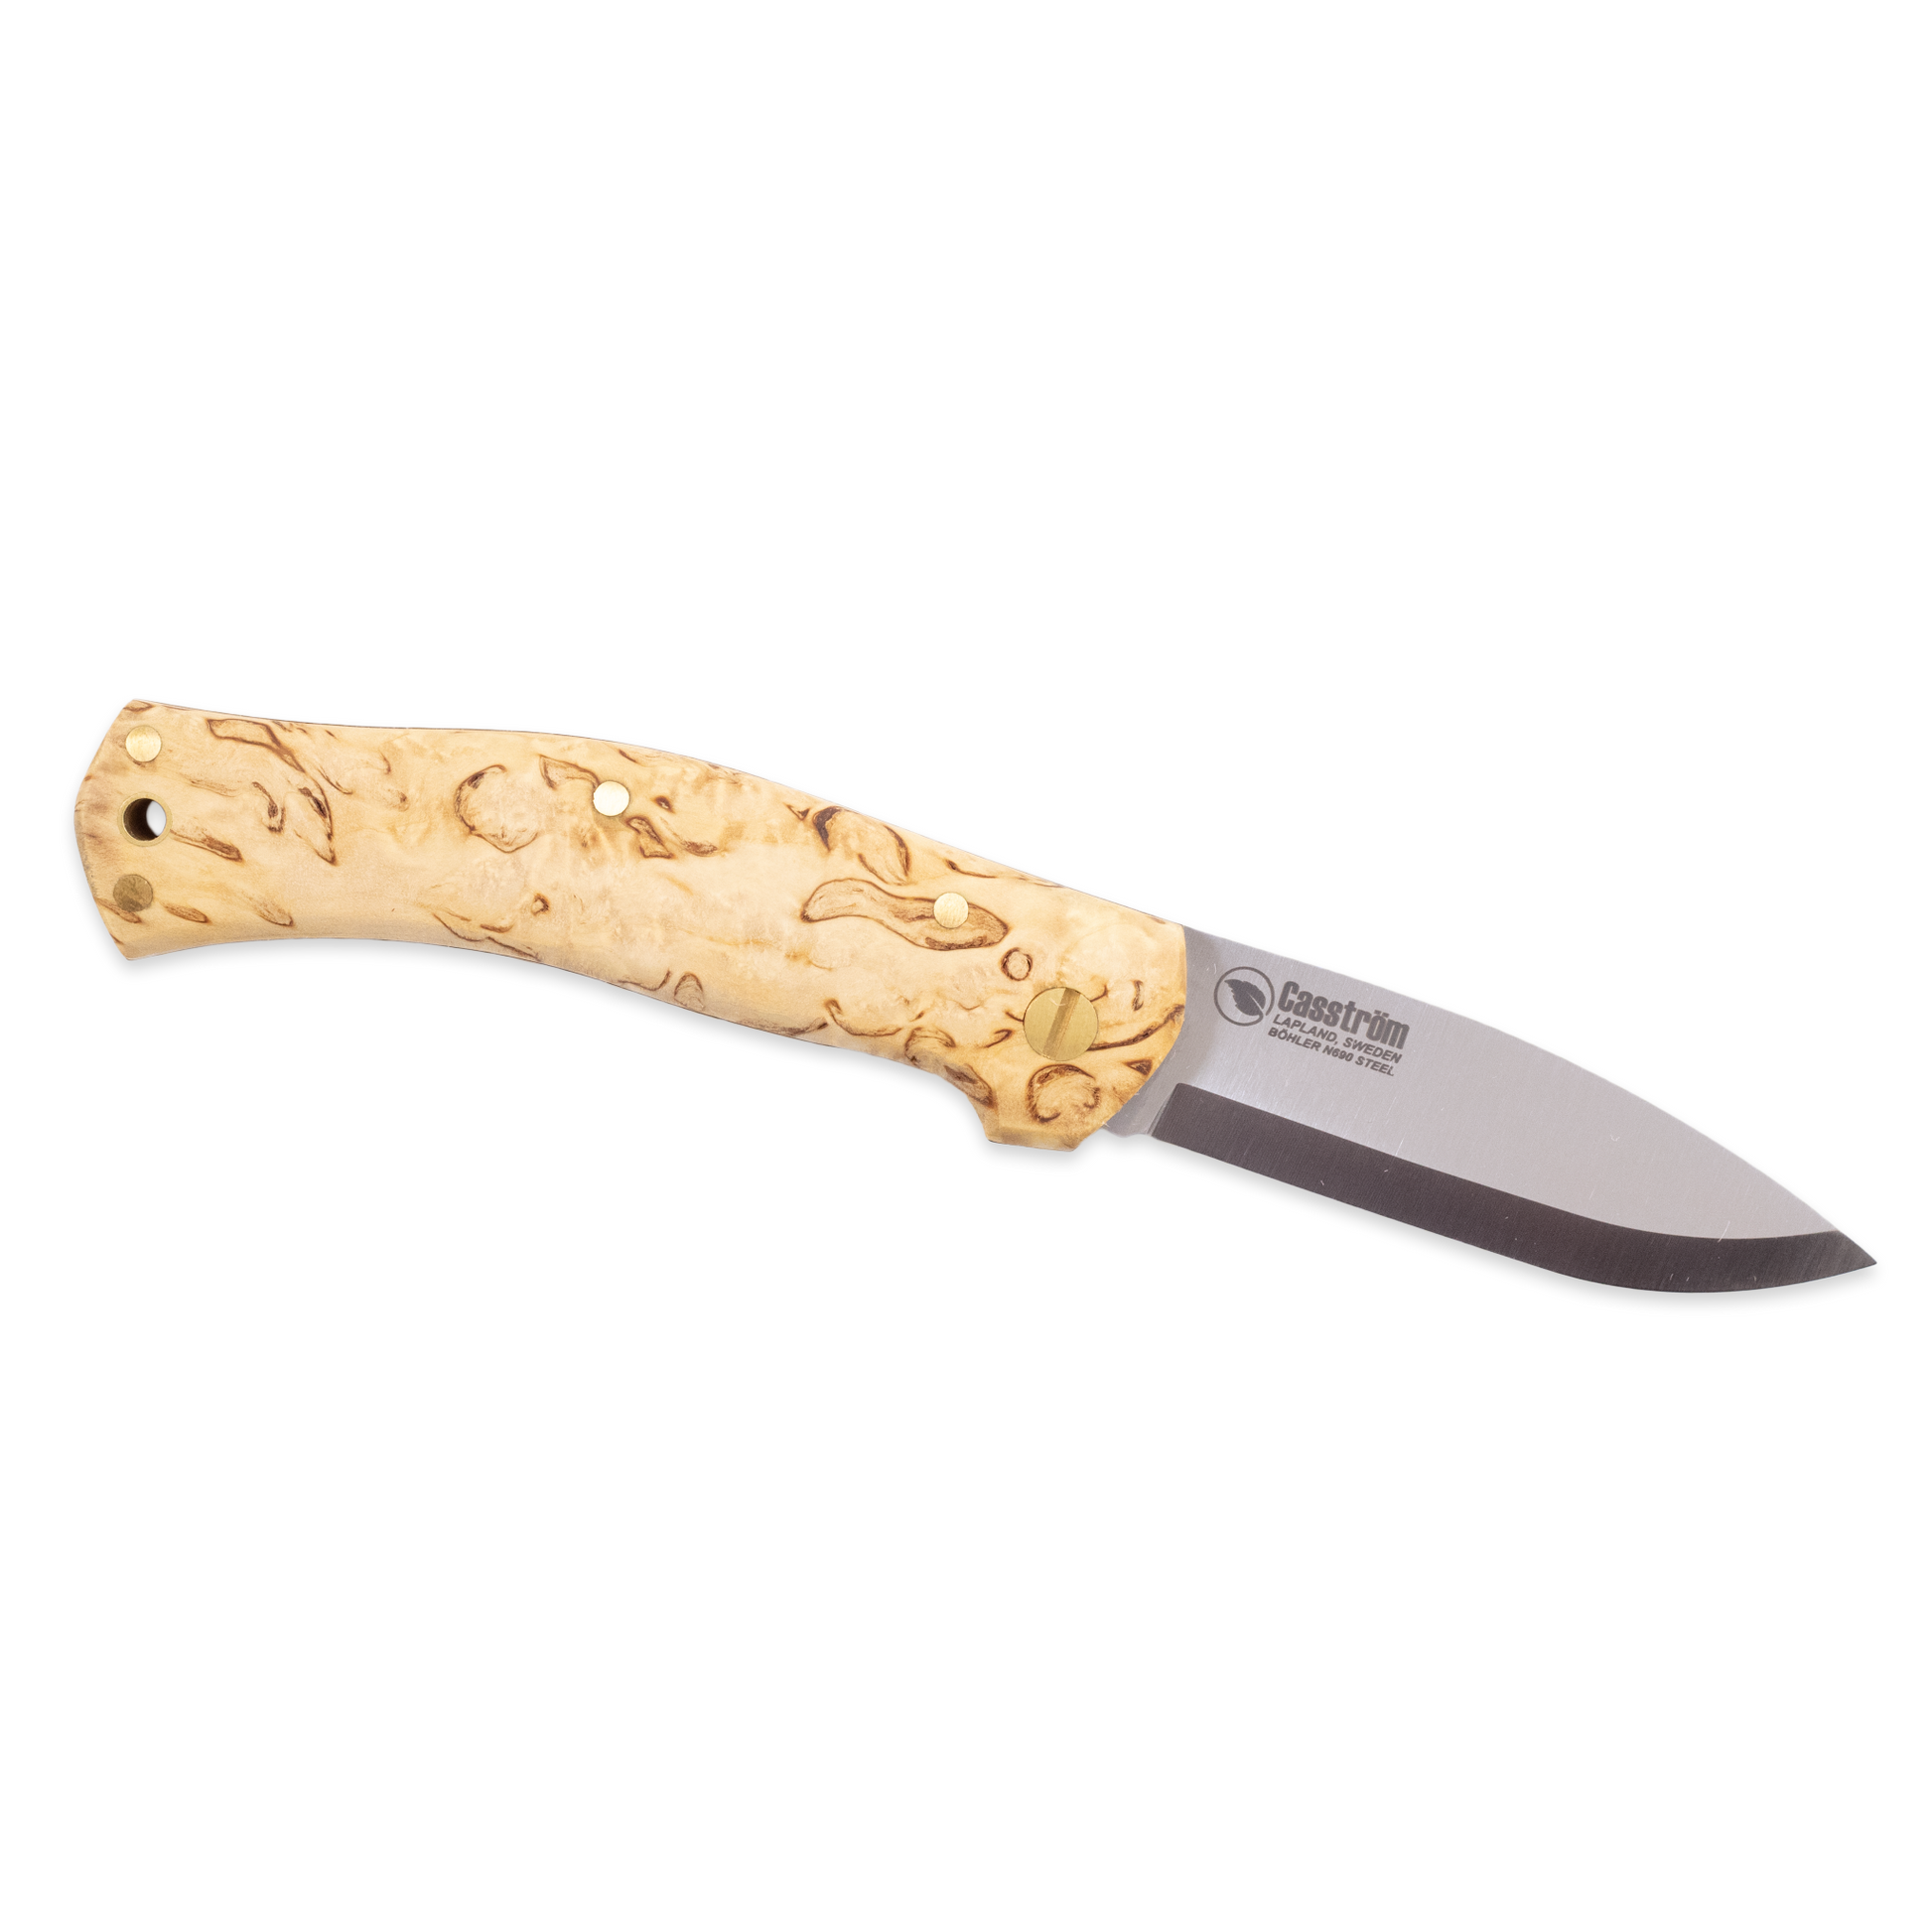 The Lars Falt Slip Joint. A UK-legal folding knife with a blade of recycled Swedish 14C28N stainless steel, and curly birch handle, made by Casstrom Sweden